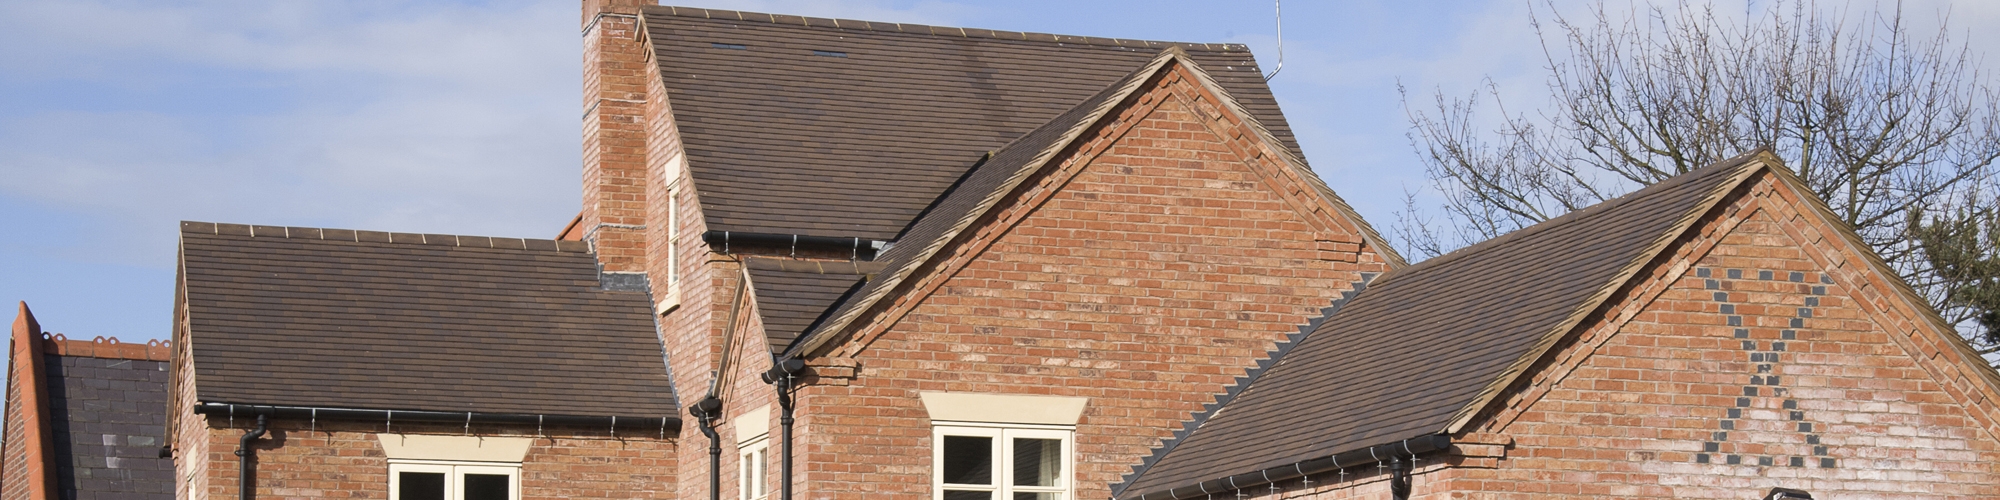 sandtoft roofing, wienerberger roofing, roofing shrewsbury, roofing chester, welsh roofing